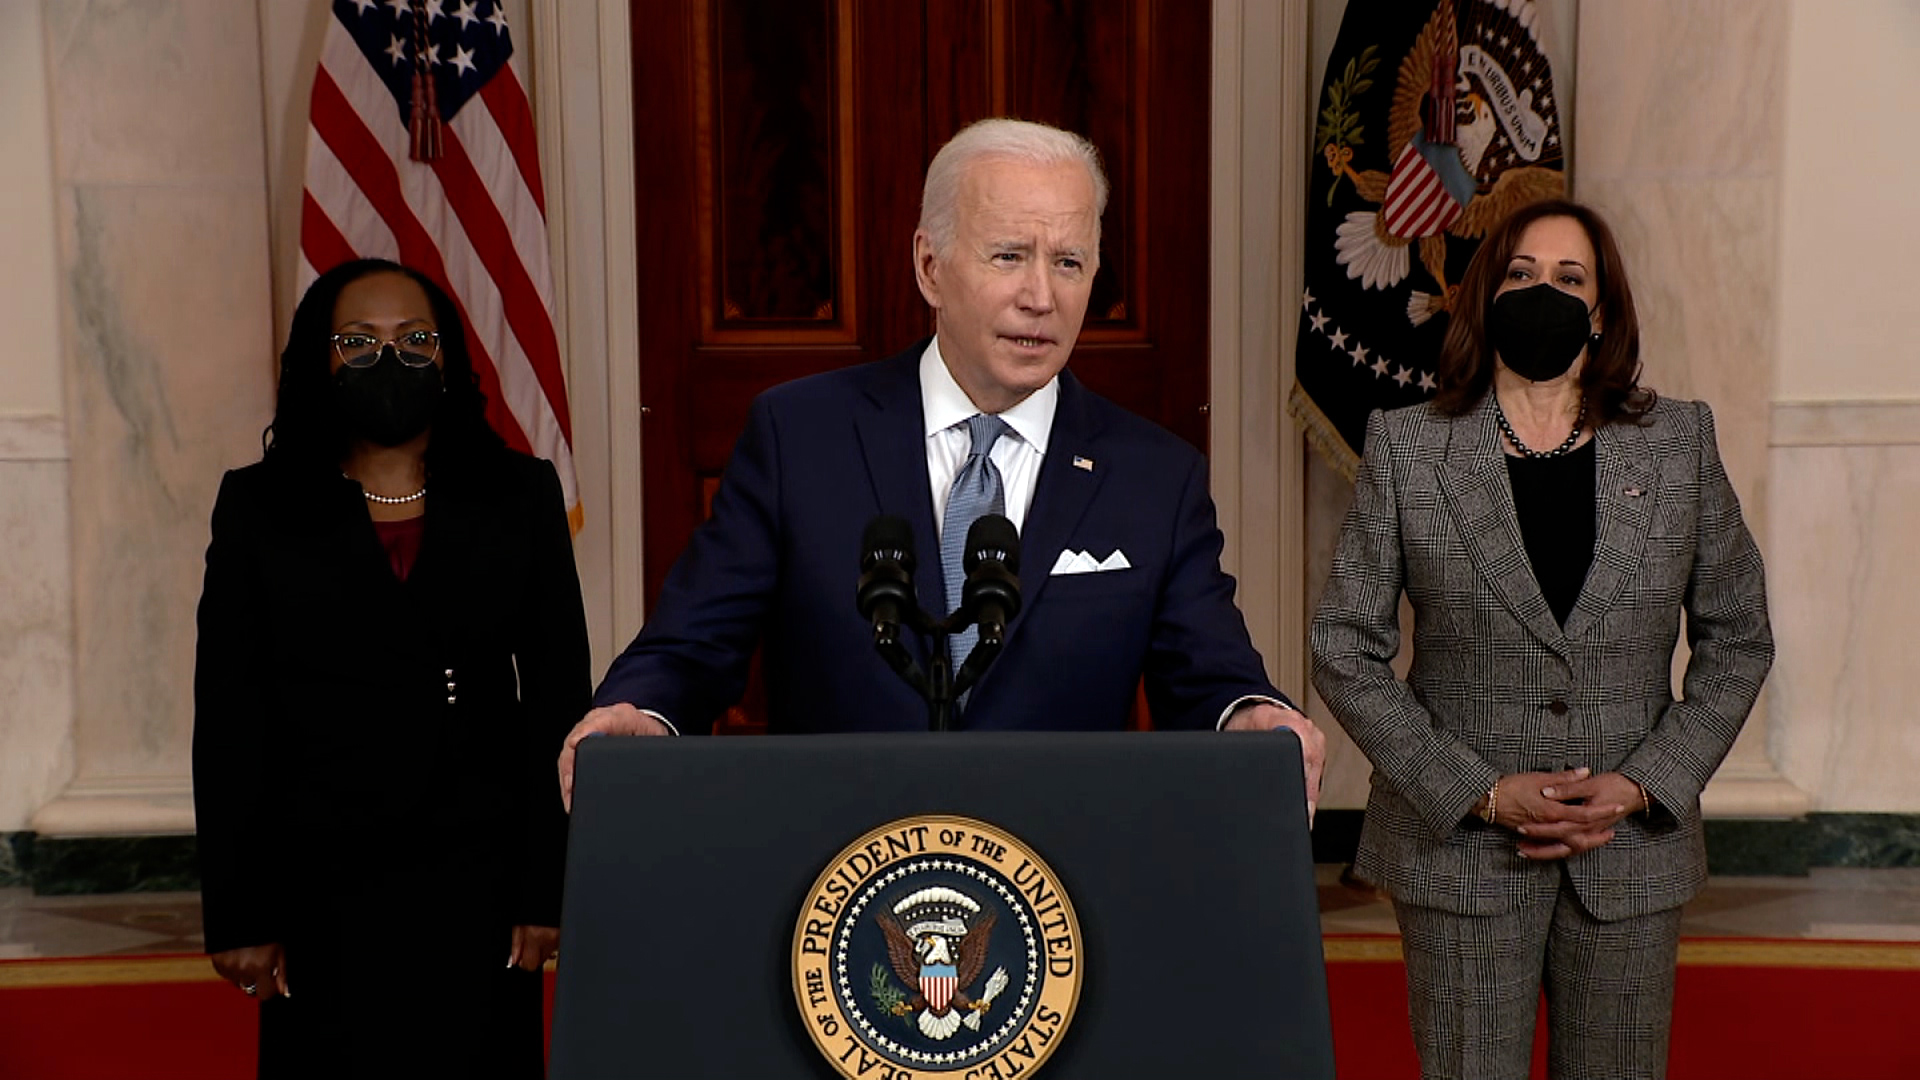 President Biden delivers remarks at the White House announcing he has selected Ketanji Brown Jackson as his nominee to the Supreme Court.